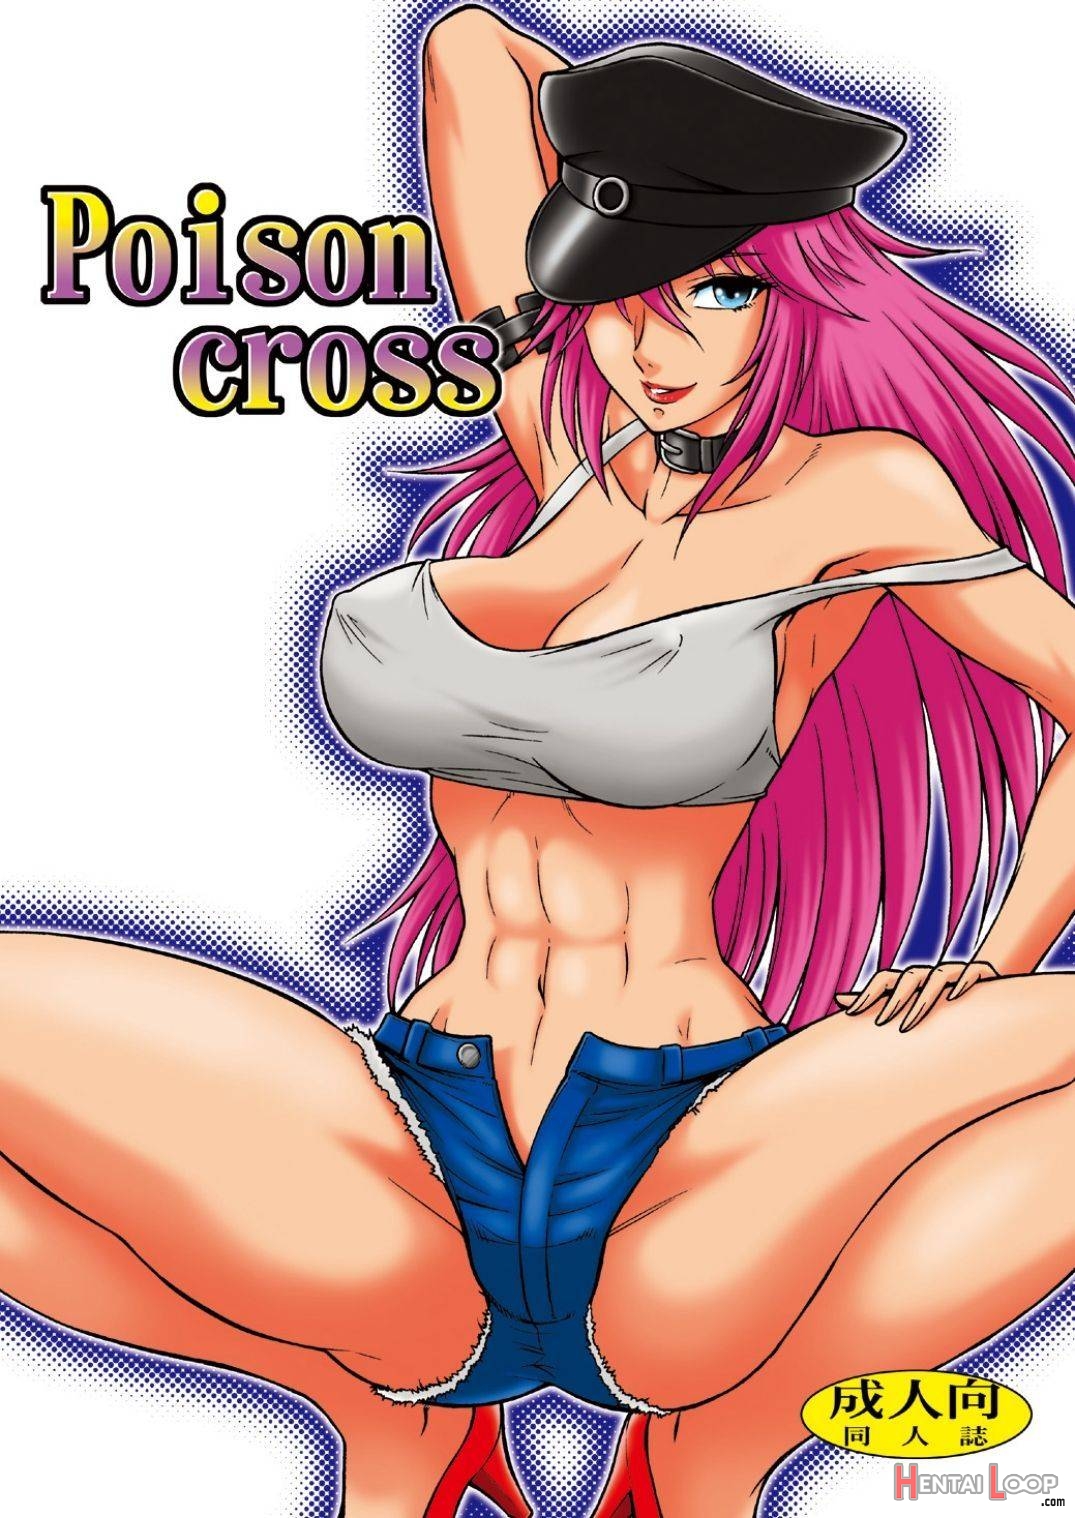 Poison cross page 1